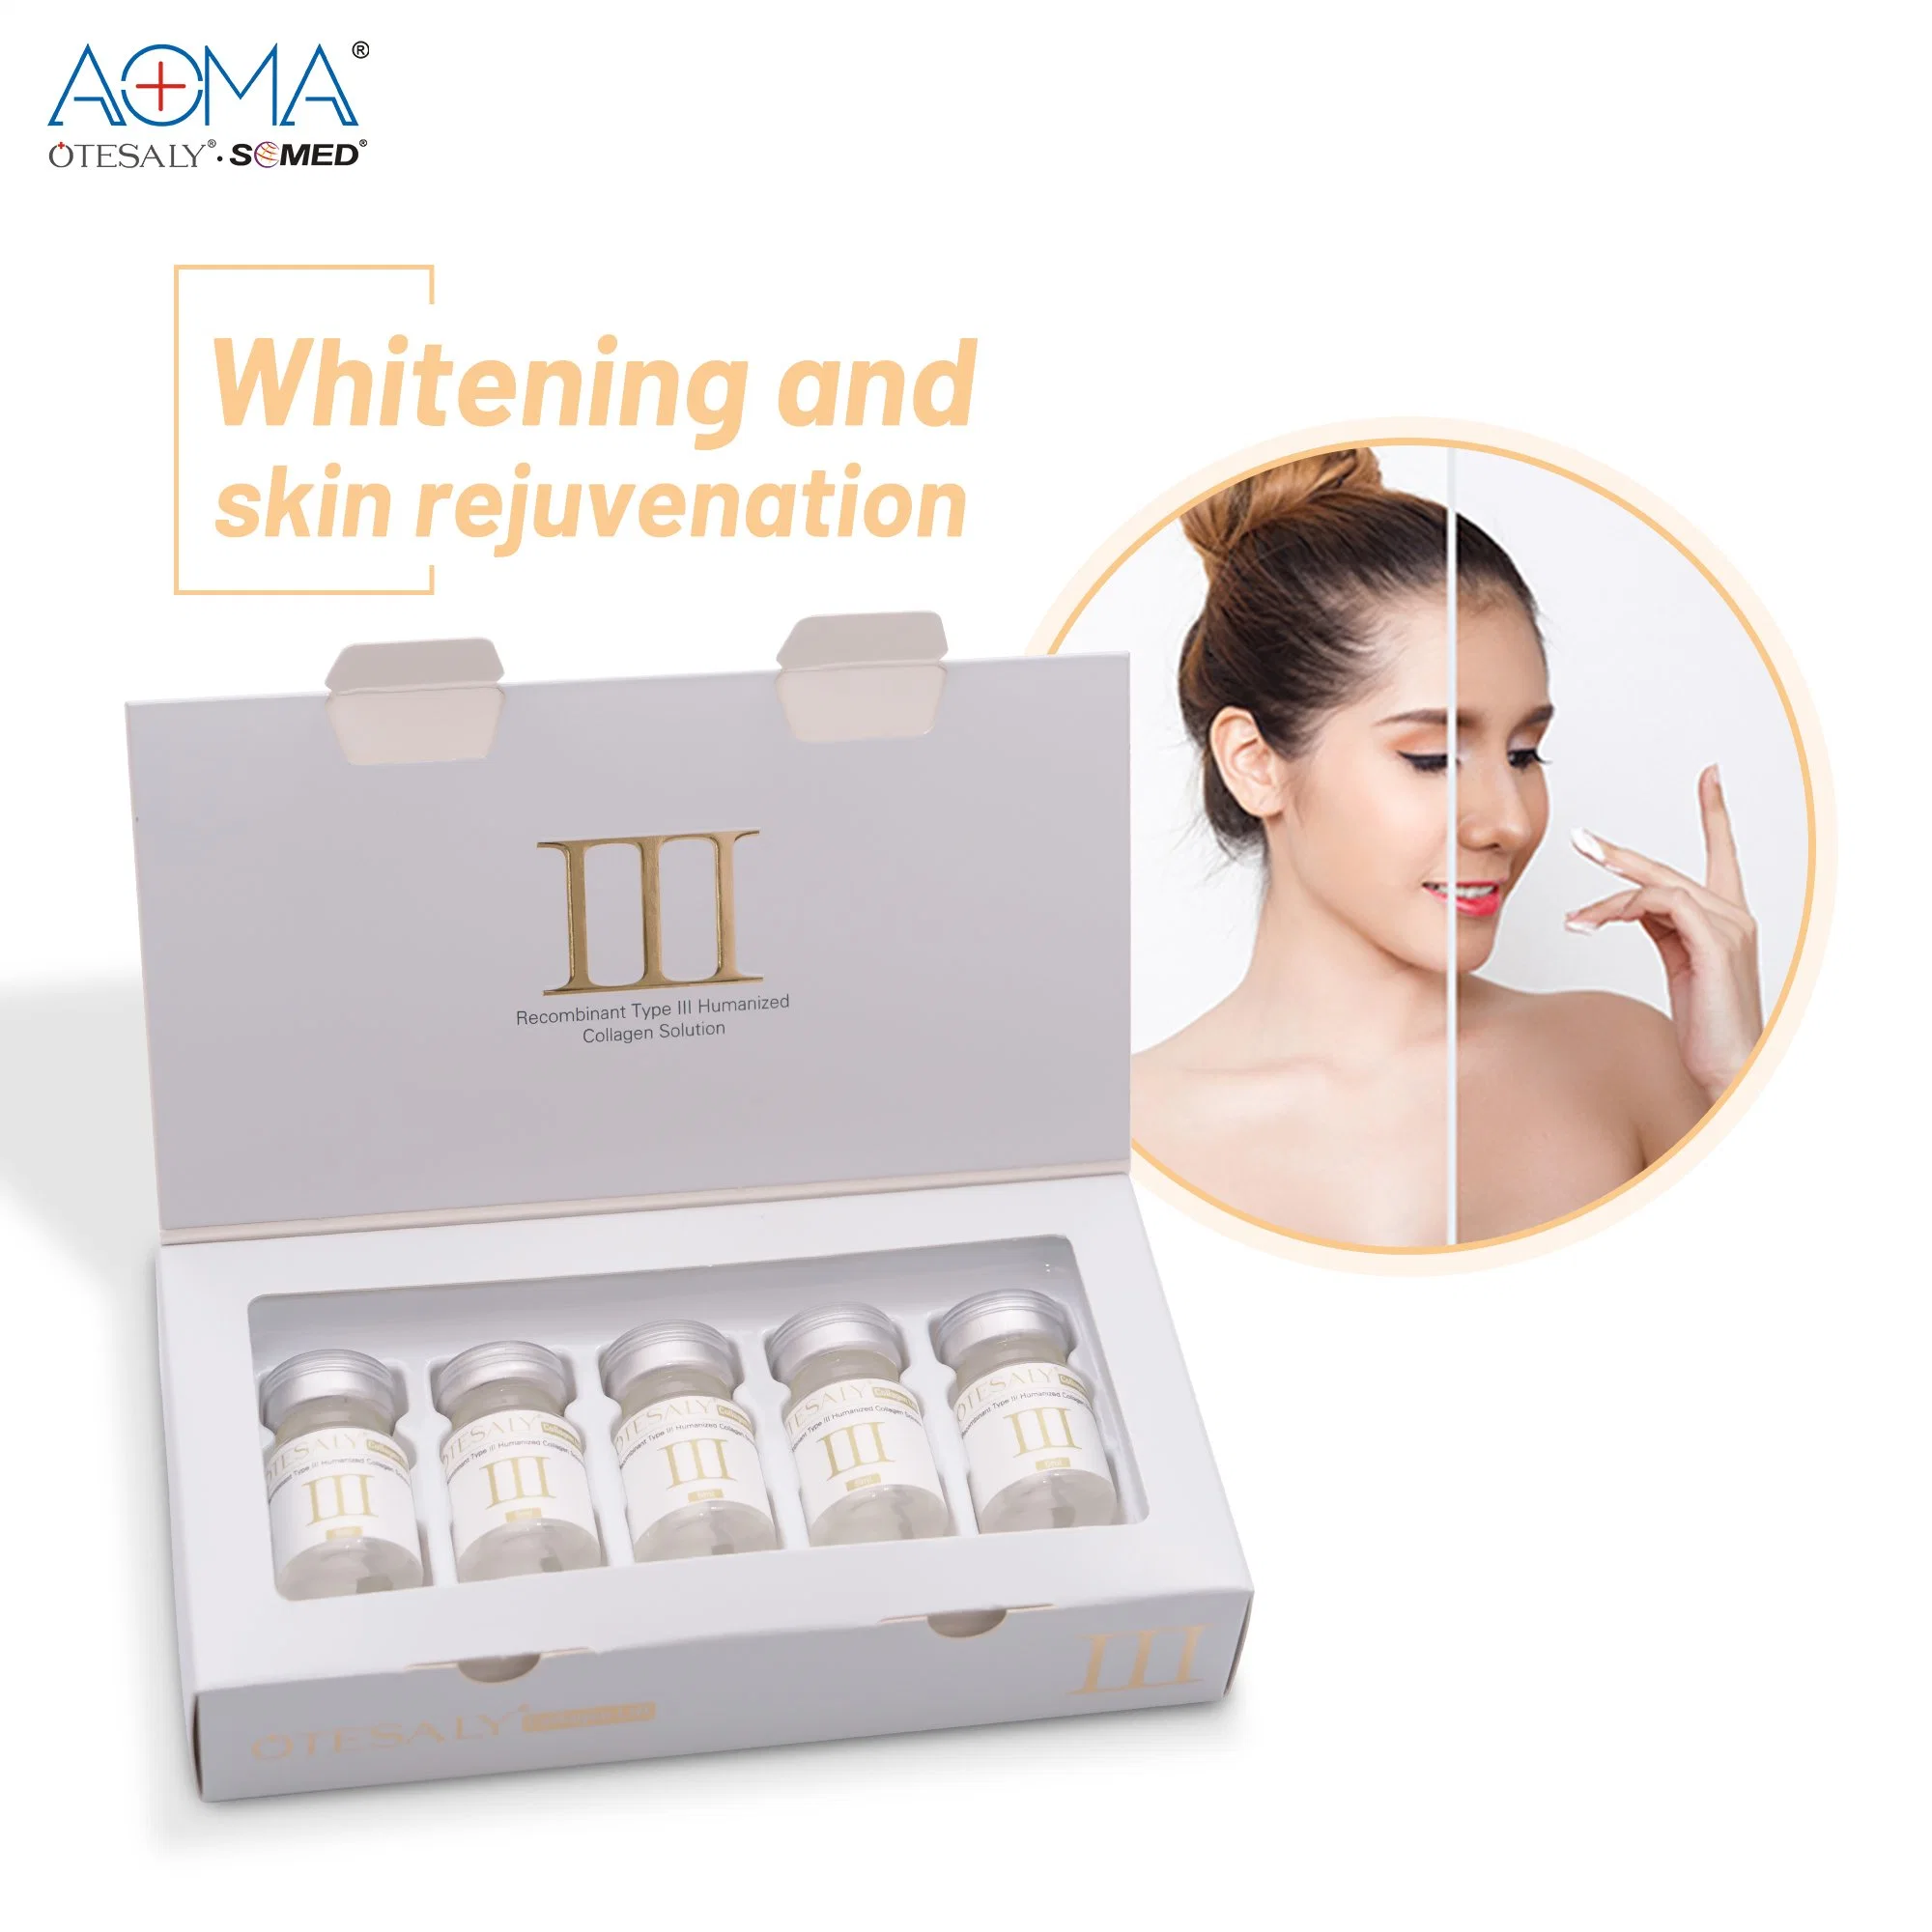 High quality/High cost performance Otesaly Collagen Essence Solution Solve Skin Sagging Fine Lines Humanized Collagen for Skin